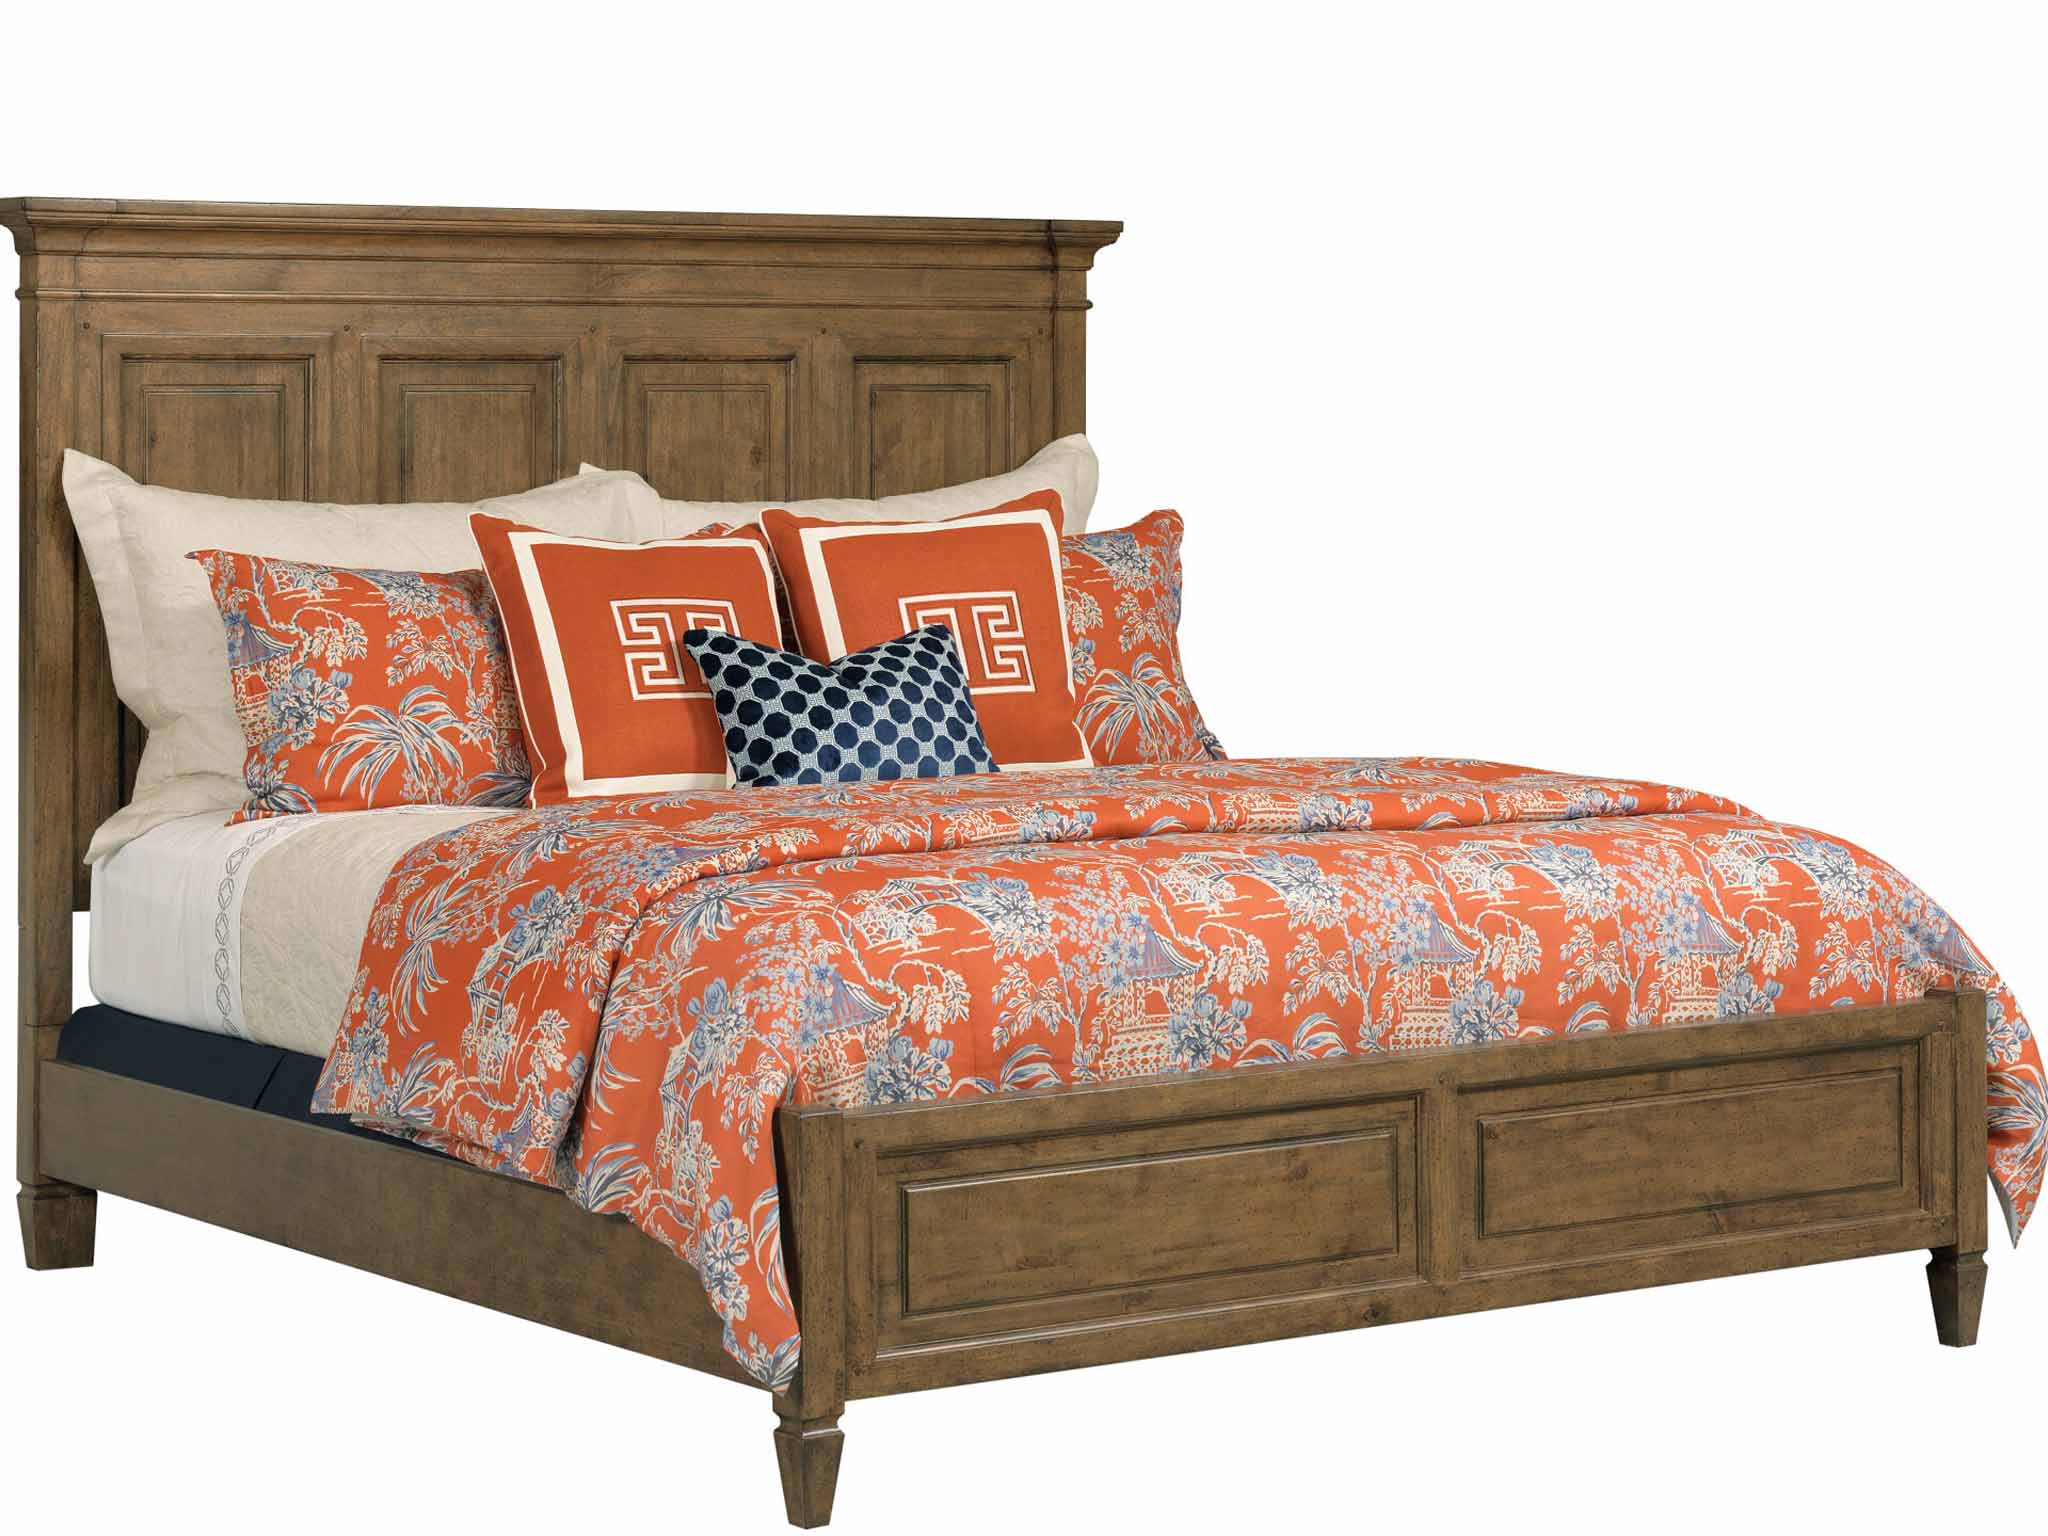 Kincaid 024-306P Ansley Hartnell King Panel Bed Complete